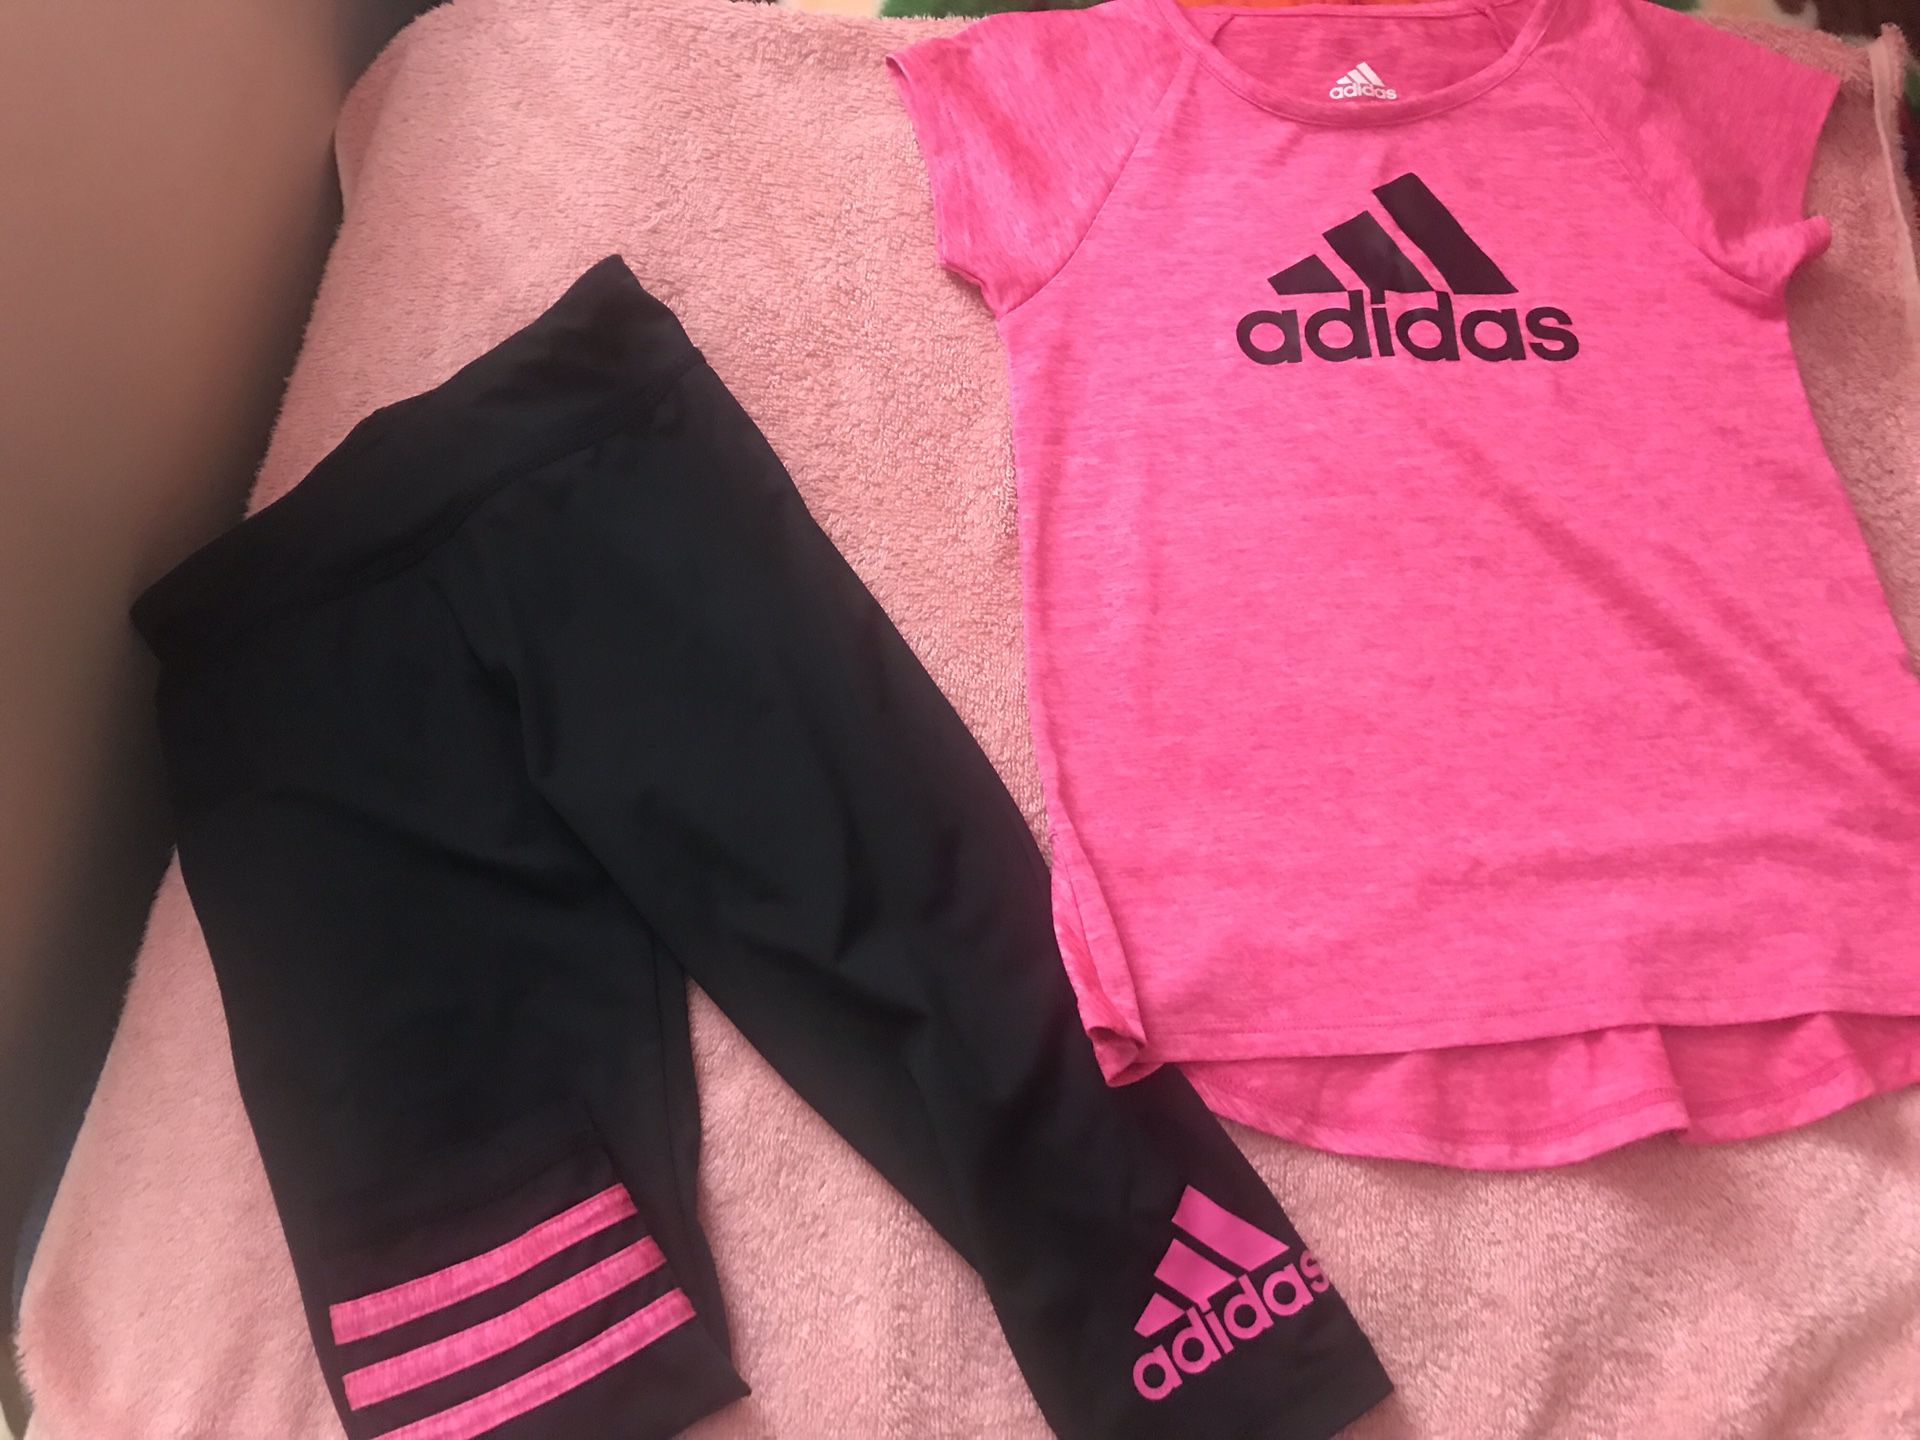 Adidas outfit size 6